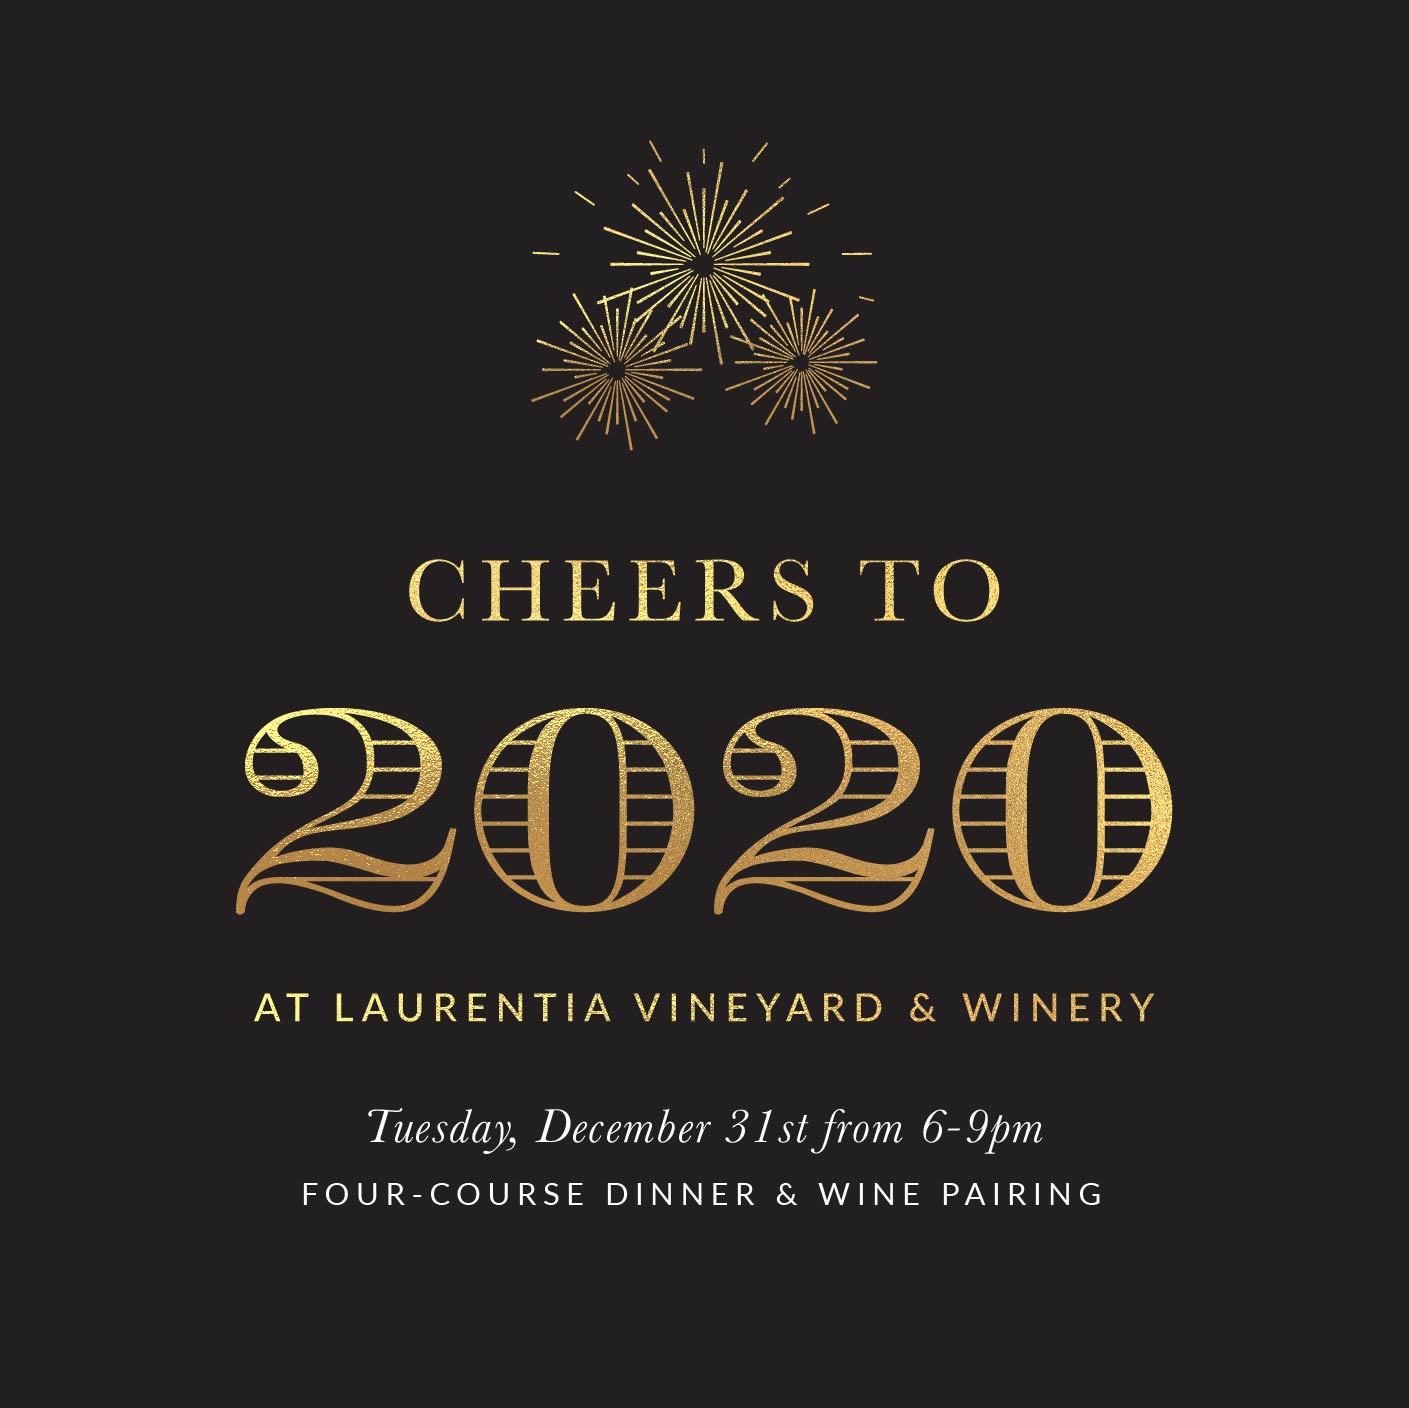 Cheers to 2020 Dinner Image